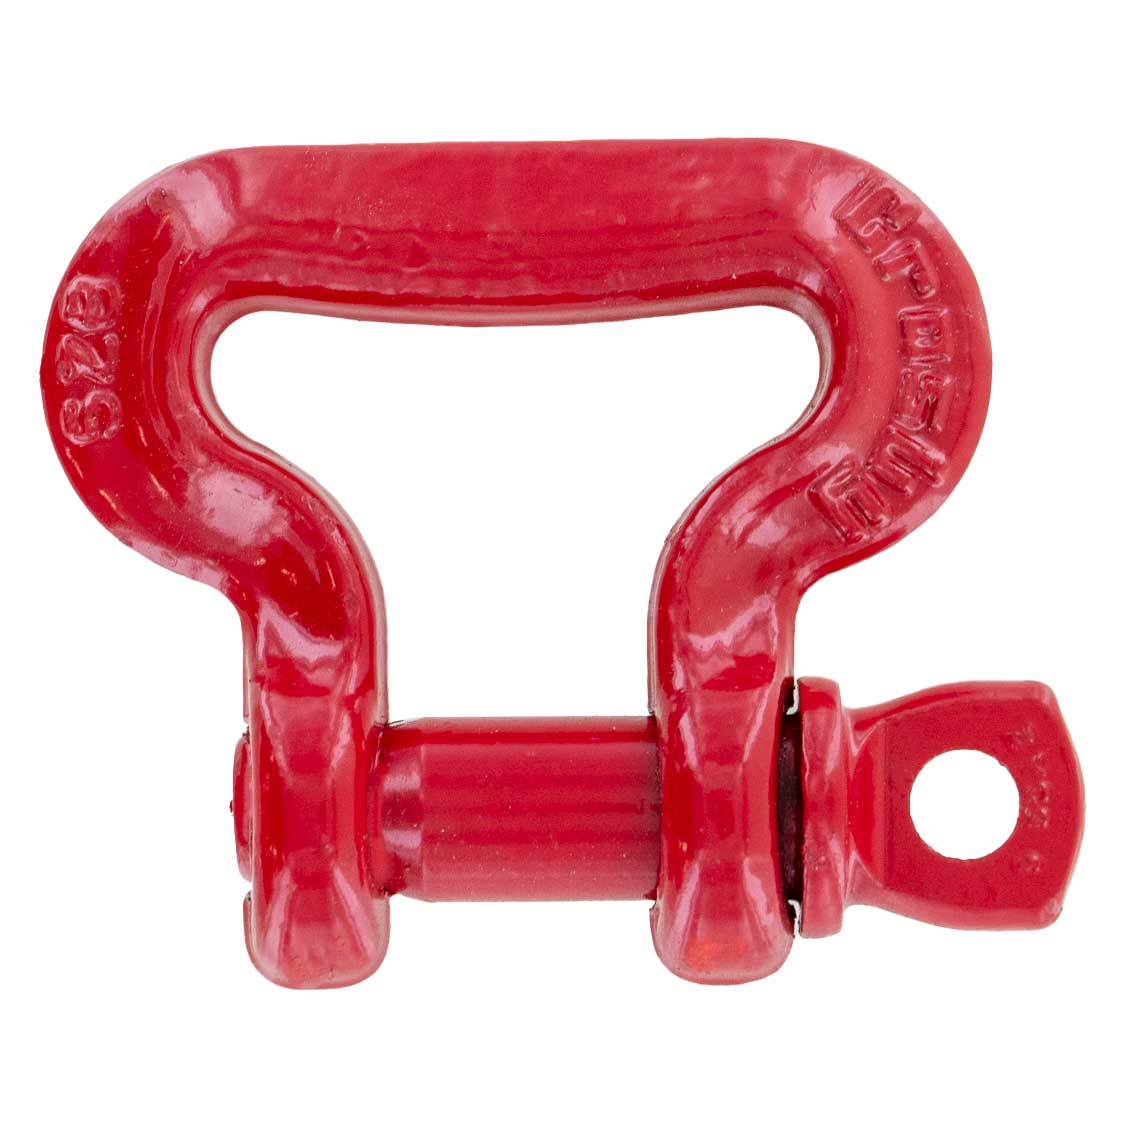 Crosby® Screw Pin Sling Saver Shackle | S-281 - 3.25 Ton primary image